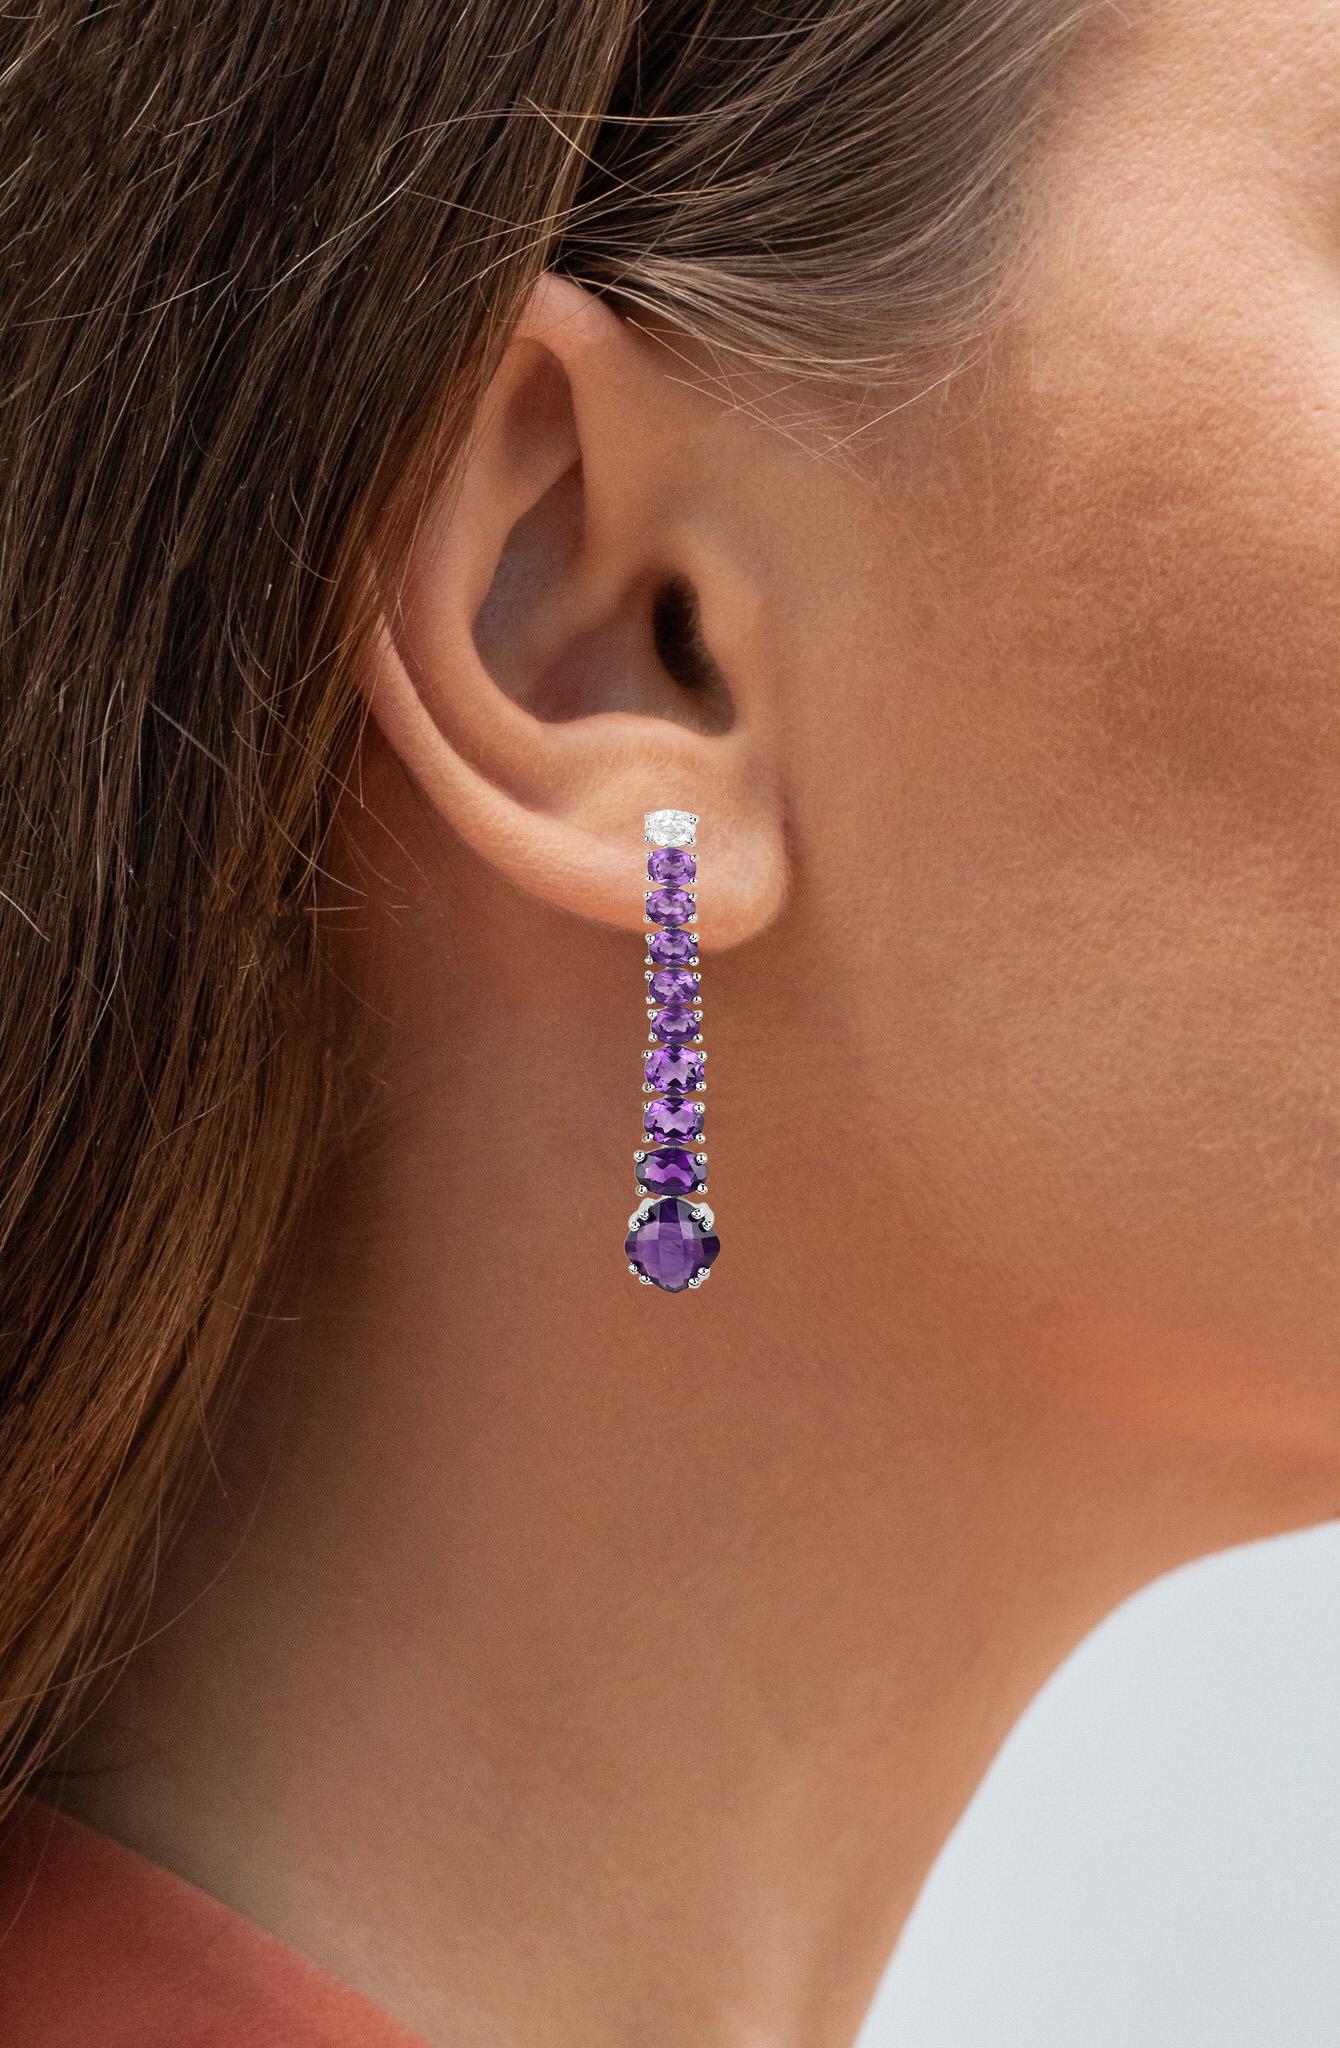 It comes with the appraisal by GIA GG/AJP
All Gemstones are Natural 
18 Amethysts = 7.14 Carats
2 White Topaz = 0.44 Carats
Metal: Sterling Silver
Post With Friction Back
Length: 40 mm